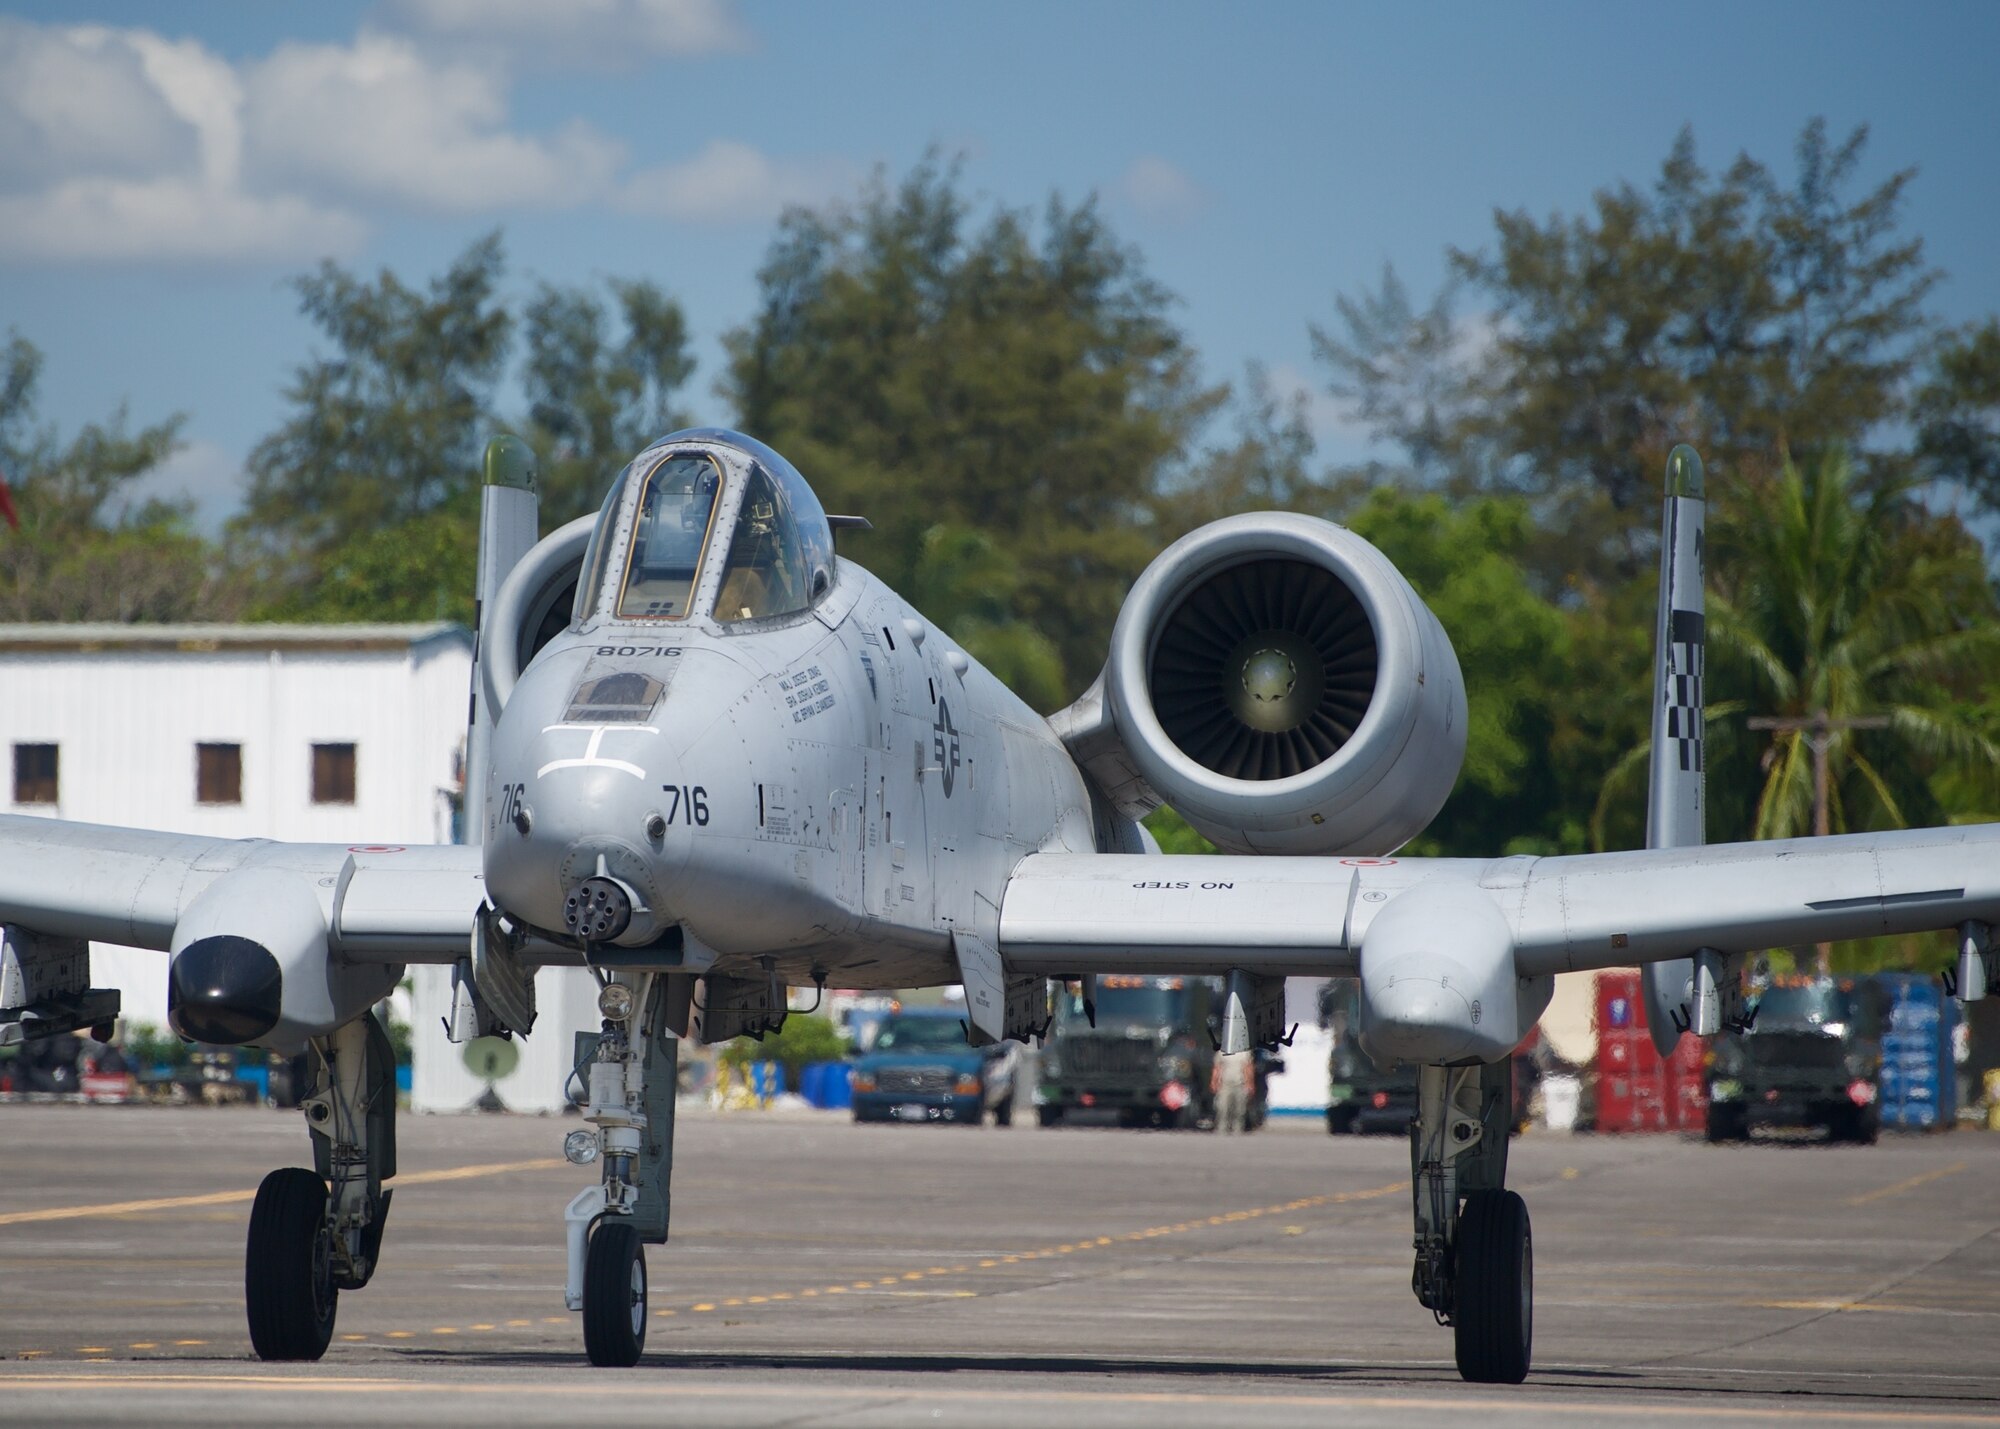 A U.S. Air Force A-10C Thunderbolt II taxies prior to takeoff from Clark Air Base, Philippines, on an air and maritime domain awareness mission April 21, 2016. The aircraft is part of the Air Contingent stood up by U.S. Pacific Command at the invitation of the Philippine government, demonstrating the U.S. commitment to partners and allies in the Indo-Asia-Pacific region. The aircraft are flying in and around the South China Sea within international airspace, demonstrating freedom of navigation and providing transparency of operations in these areas. (U.S. Air Force photo by Capt. Susan Harrington)